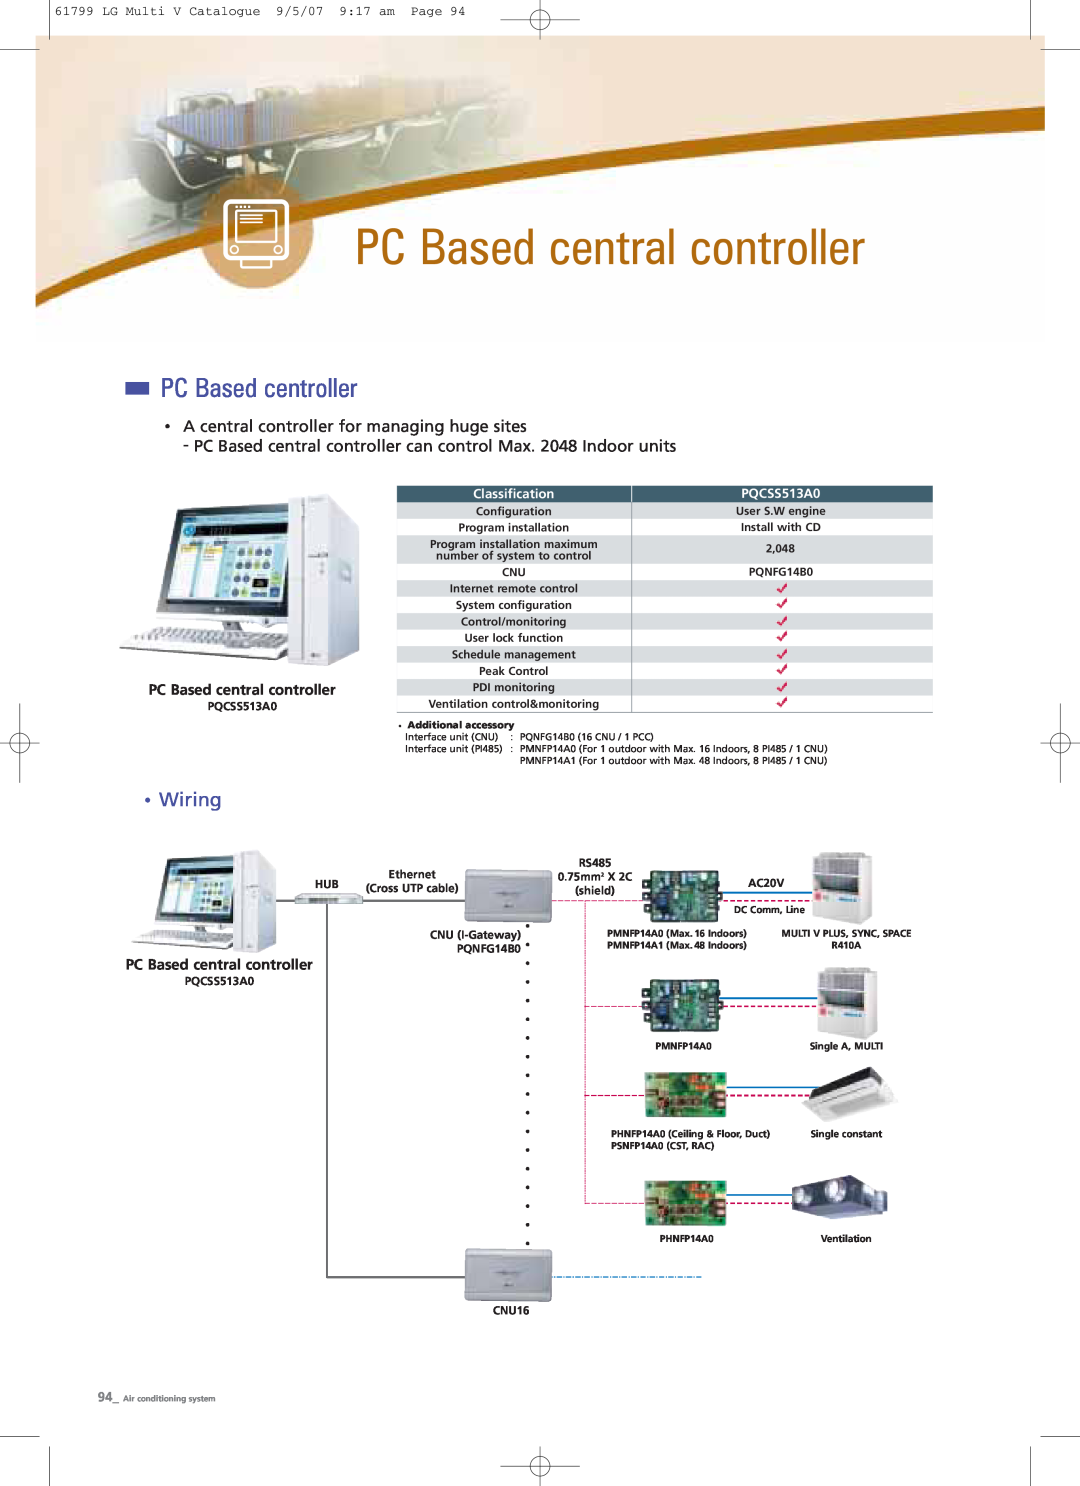 LG Electronics PRHR040 PC Based central controller, PC Based centroller, Wiring, LG Multi V Catalogue 9/5/07 917 am Page 